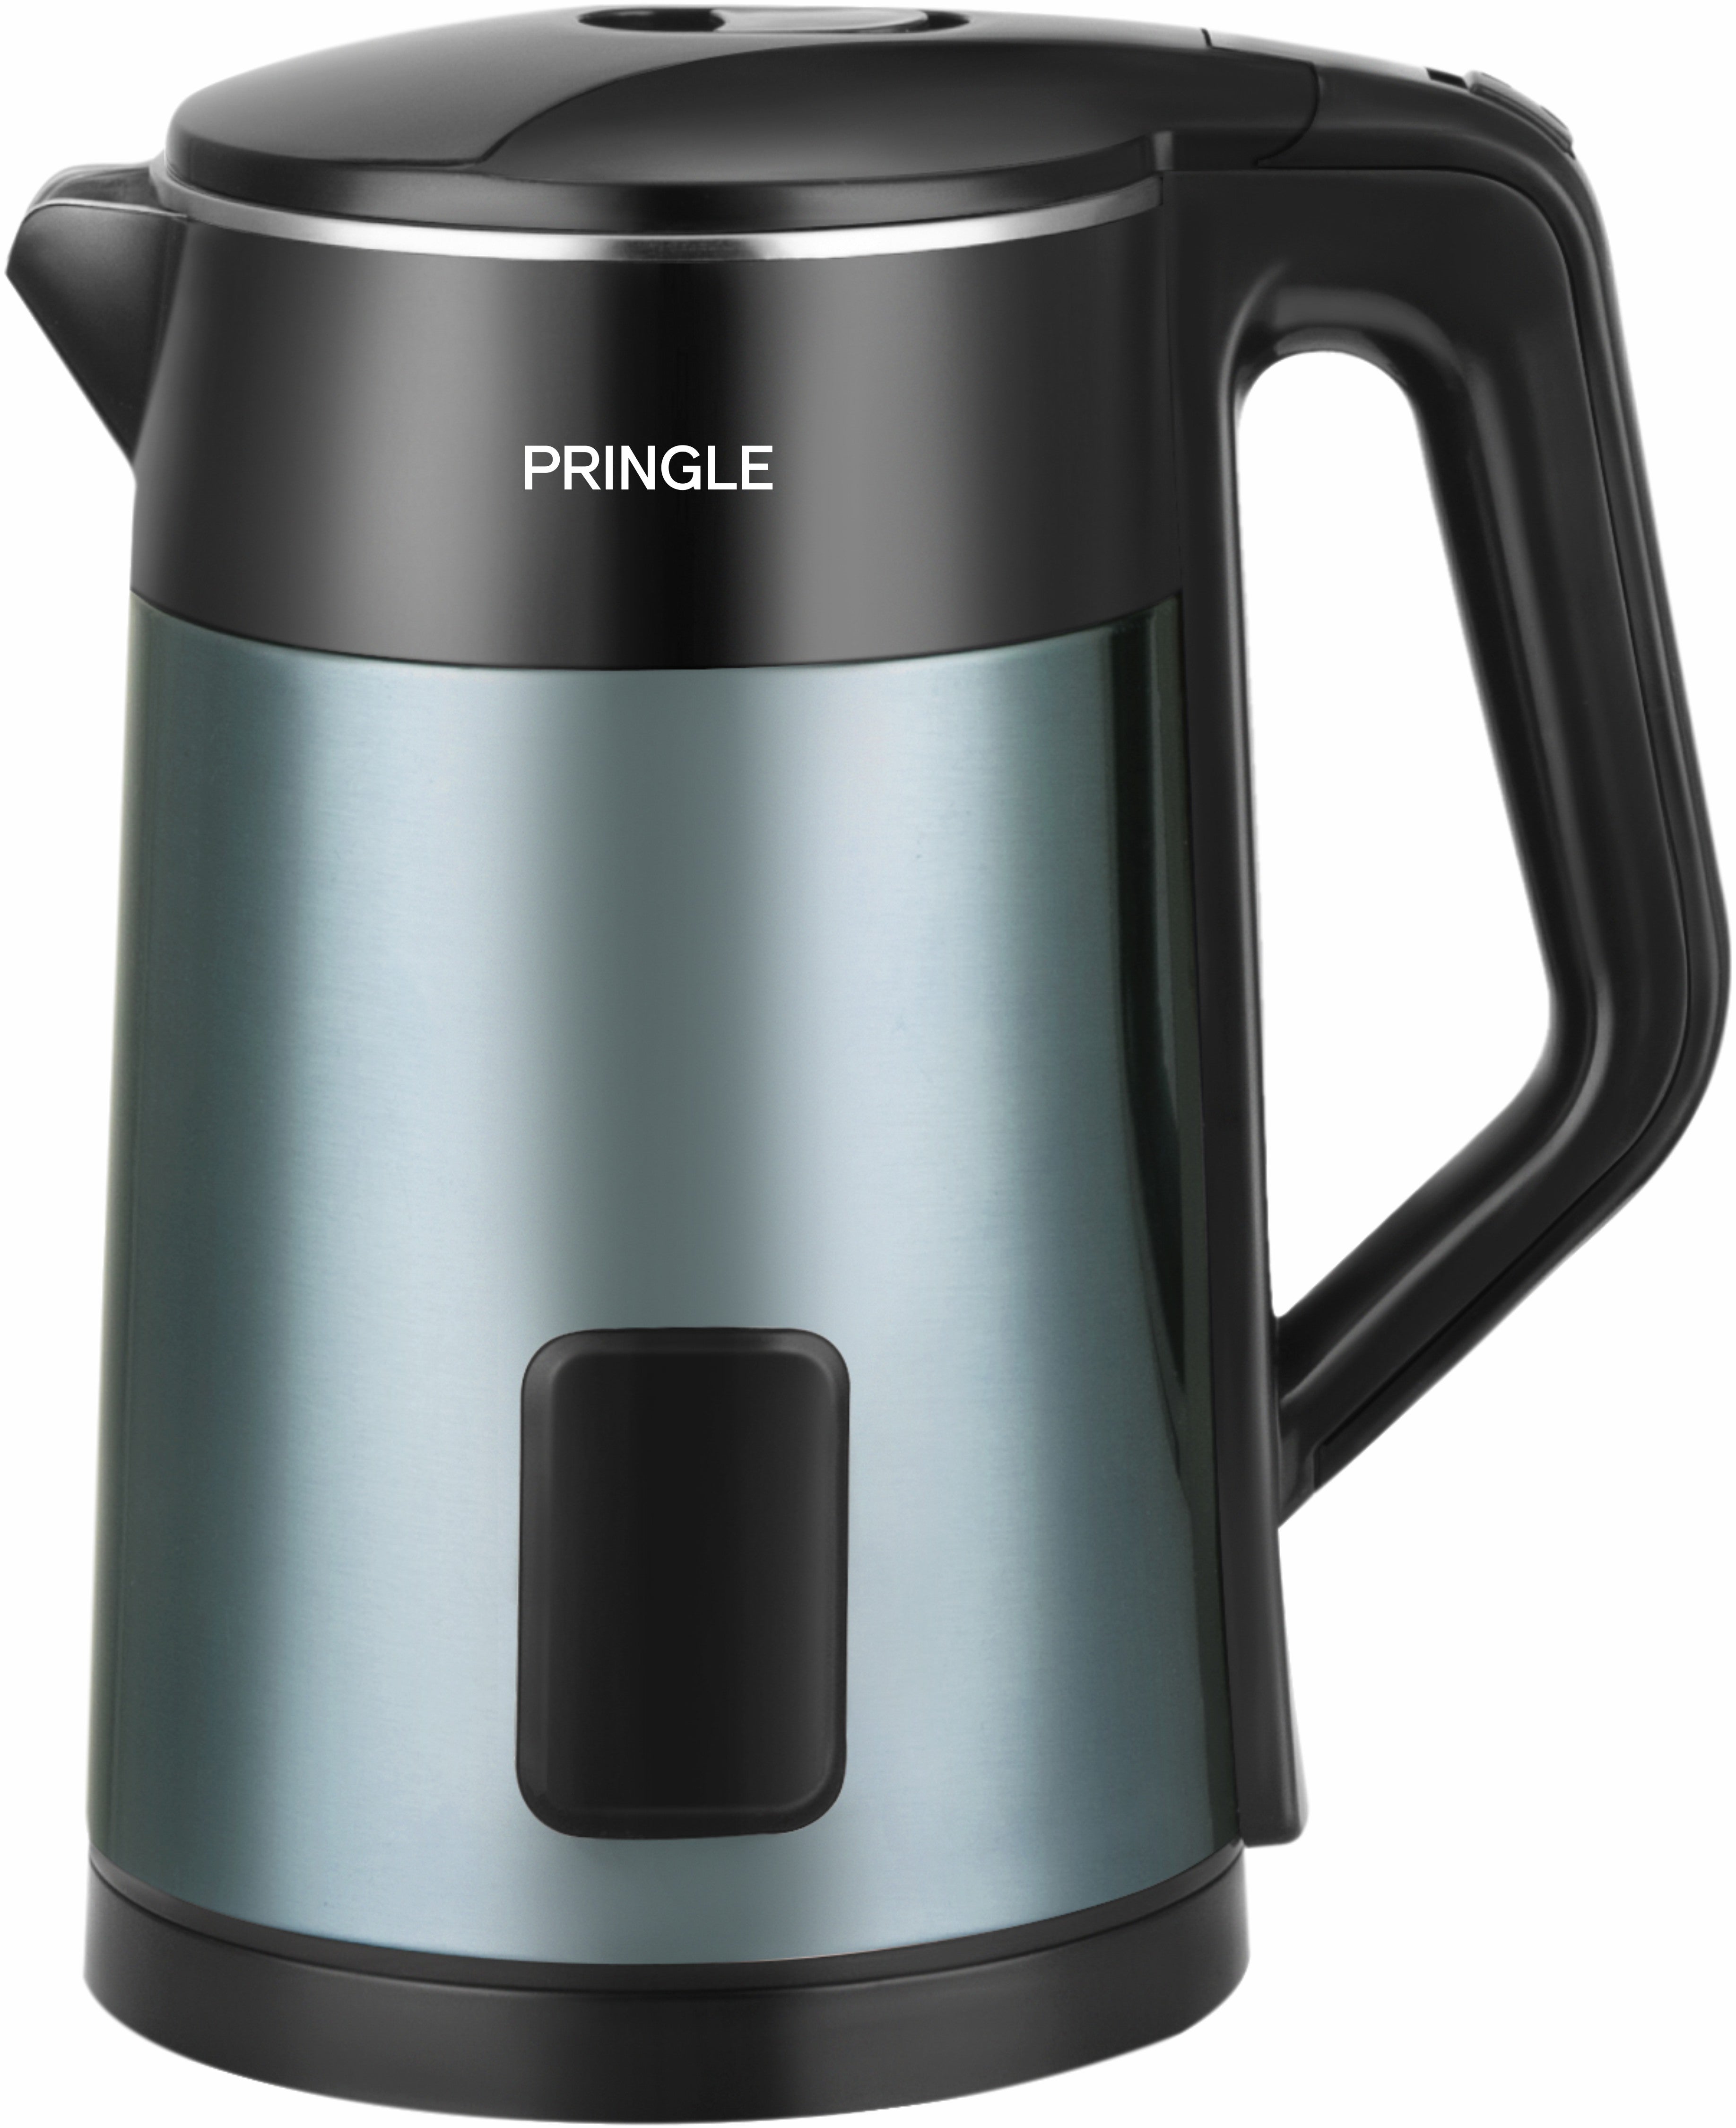 Pringle Electric Kettle Double Wall 2L - AQUA 1500W with Boil Dry Protection & Auto-Shut Off| Inbuilt SS Filter Sieve, Concealed Heating Element| 360 Deg Cordless Base, (Black)